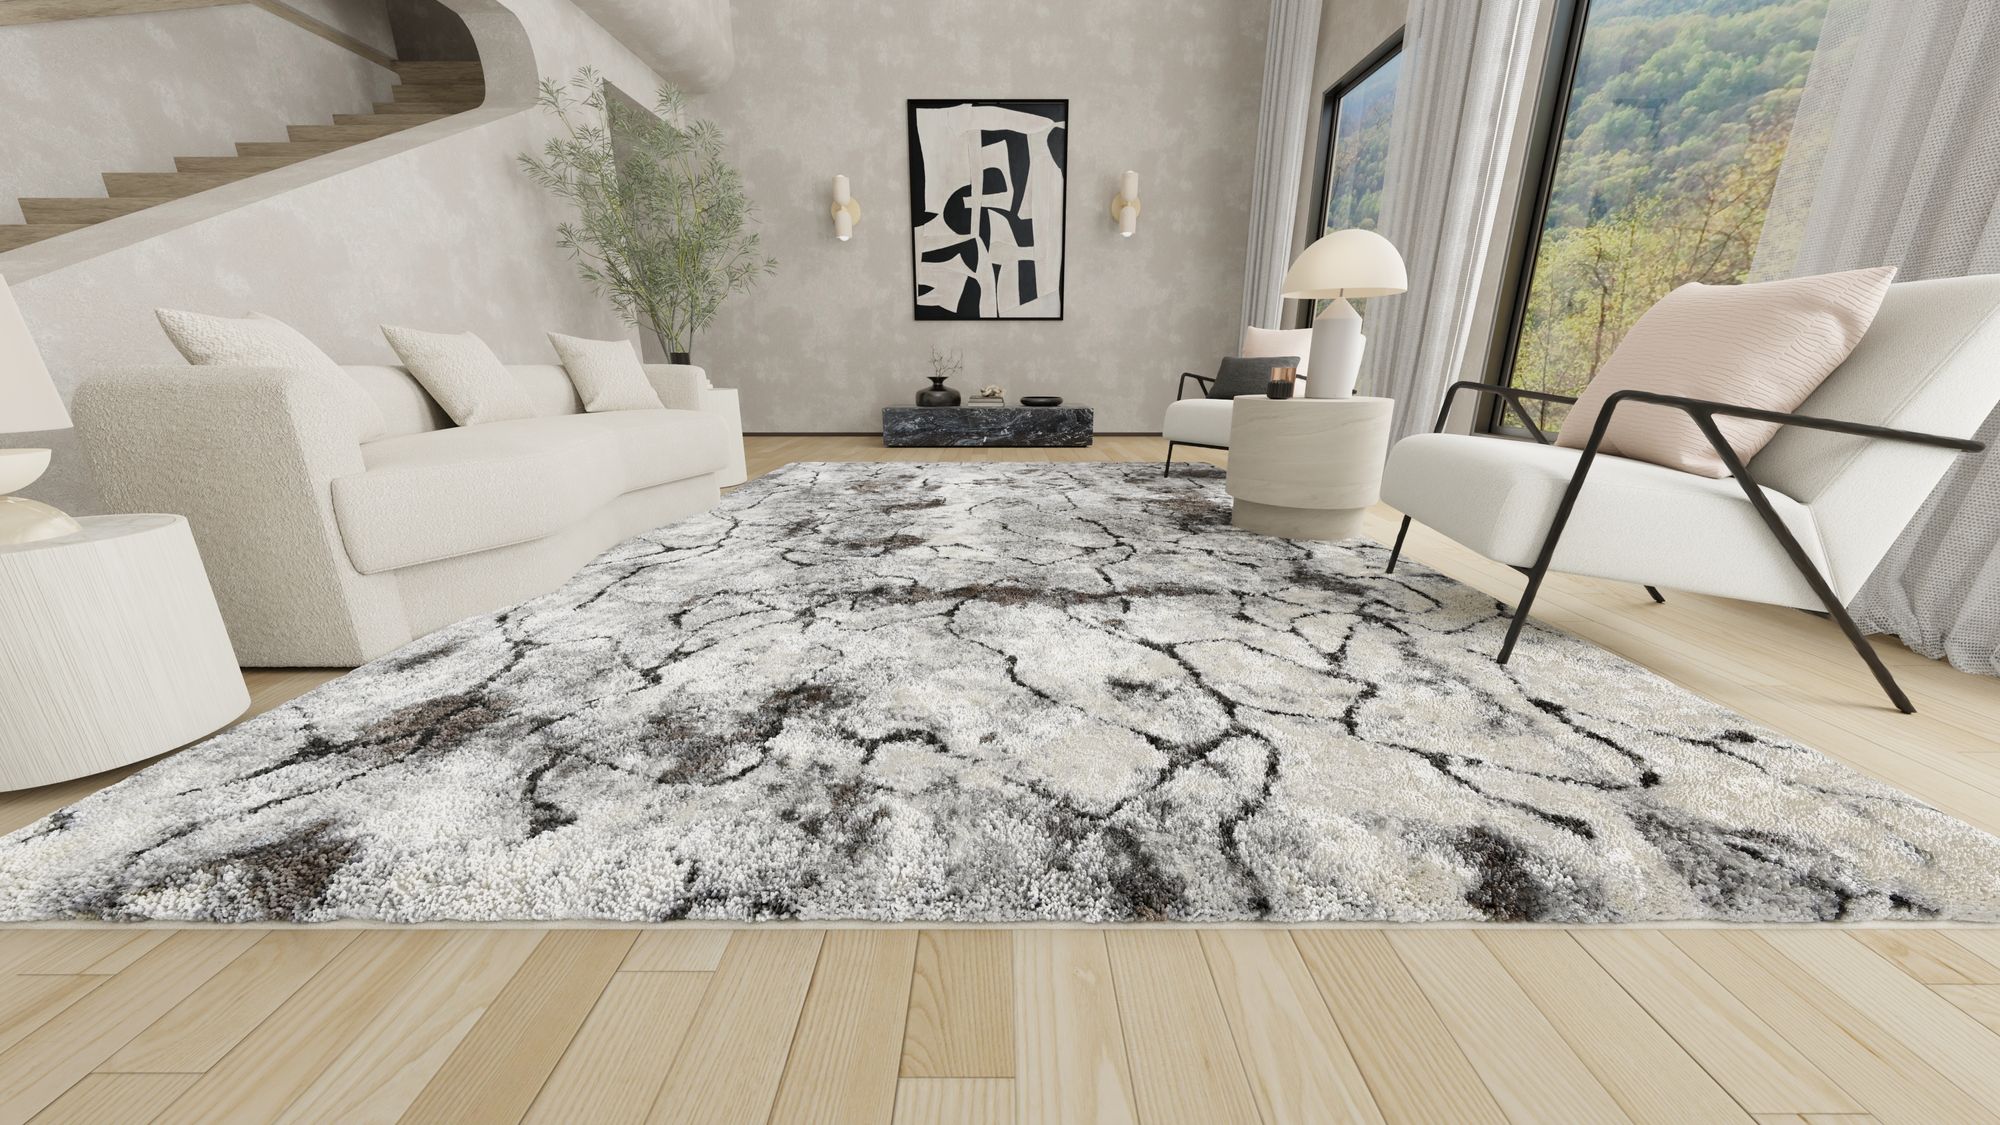 Contemporary living room with a luxurious white and black abstract Opal rug, white furniture, modern art, and large windows with a scenic view.